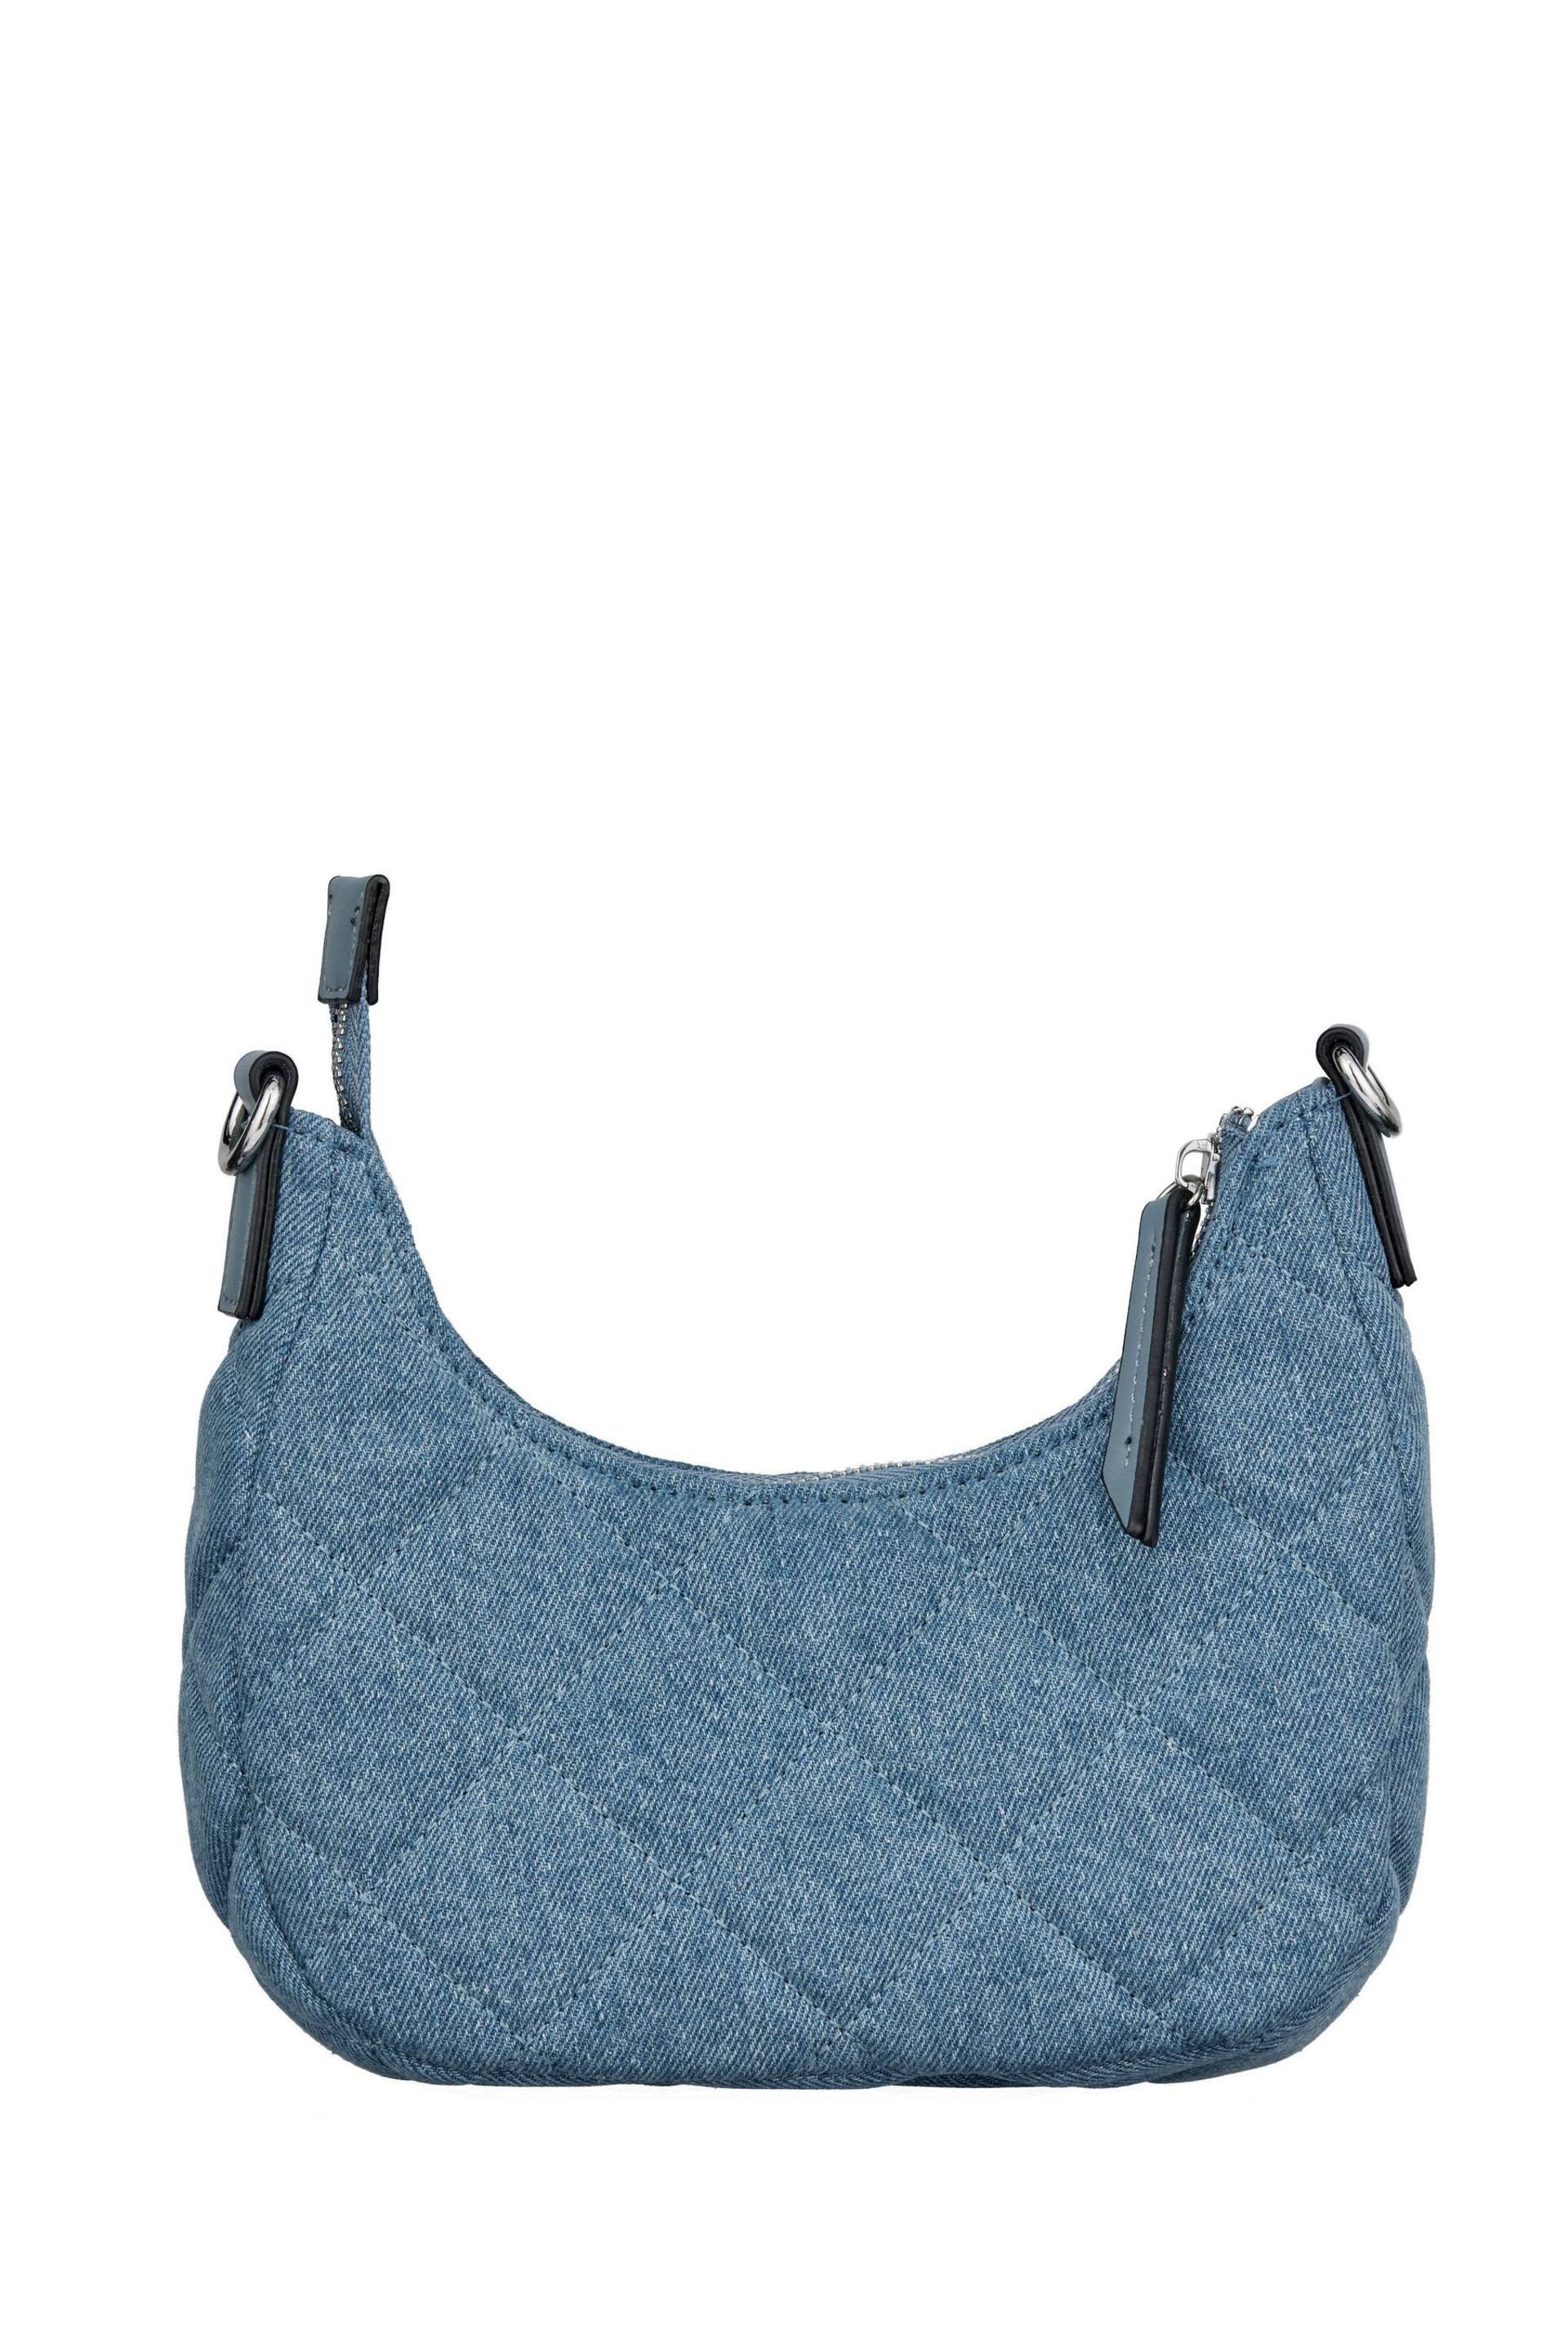 Valentino Bags Blue Ocarina Quilted Half Moon Crossbody Bag - Image 2 of 5